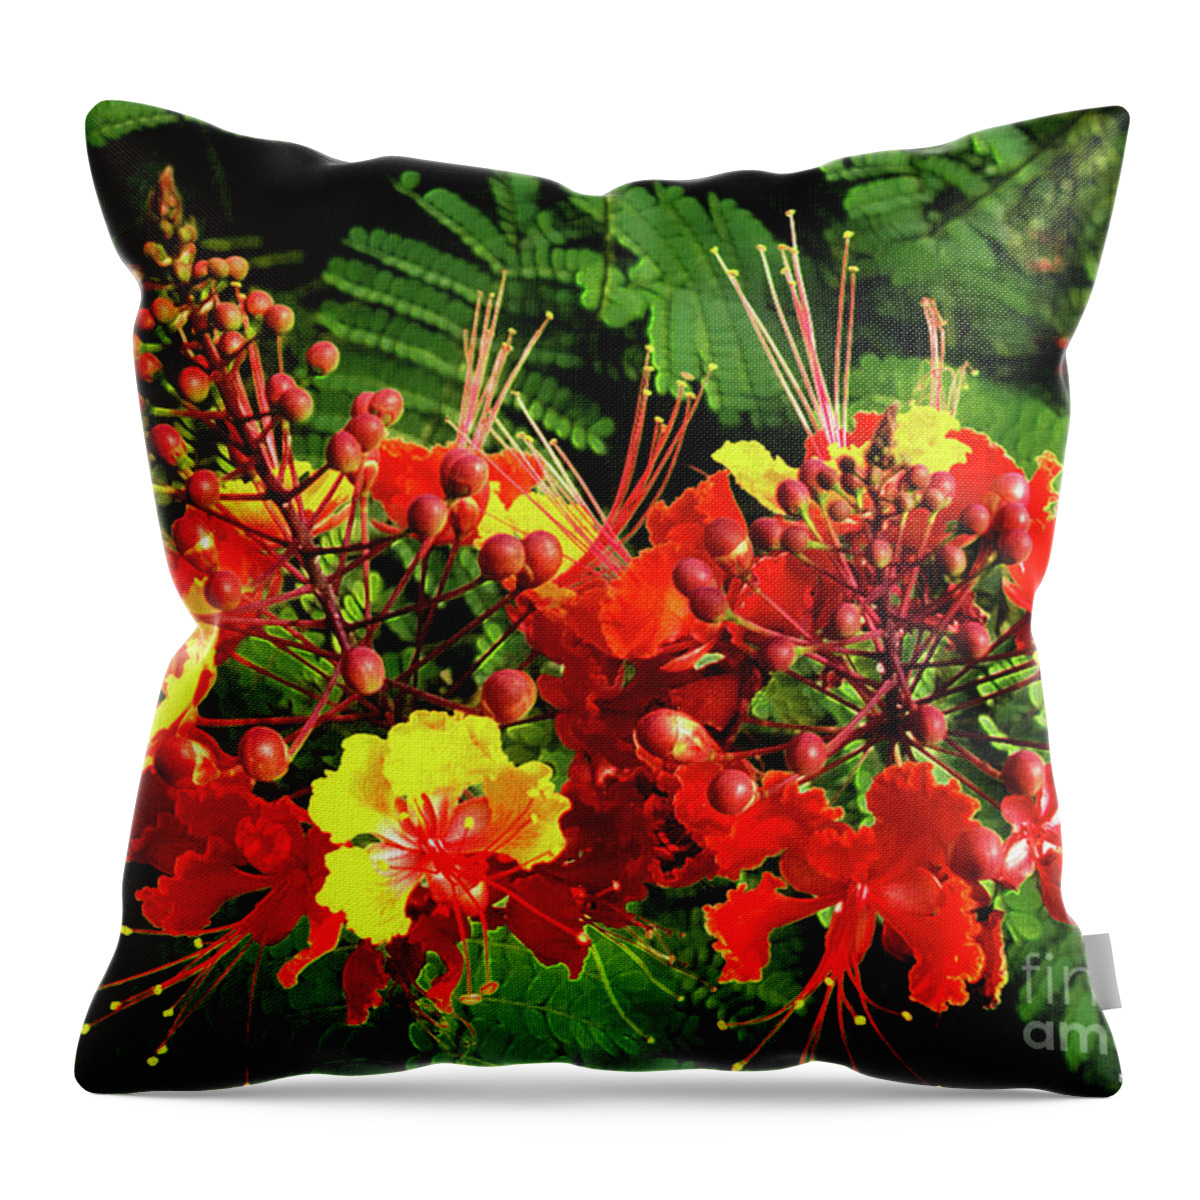 Mona Stut Throw Pillow featuring the photograph Mexican Bird Of Paradise by Mona Stut